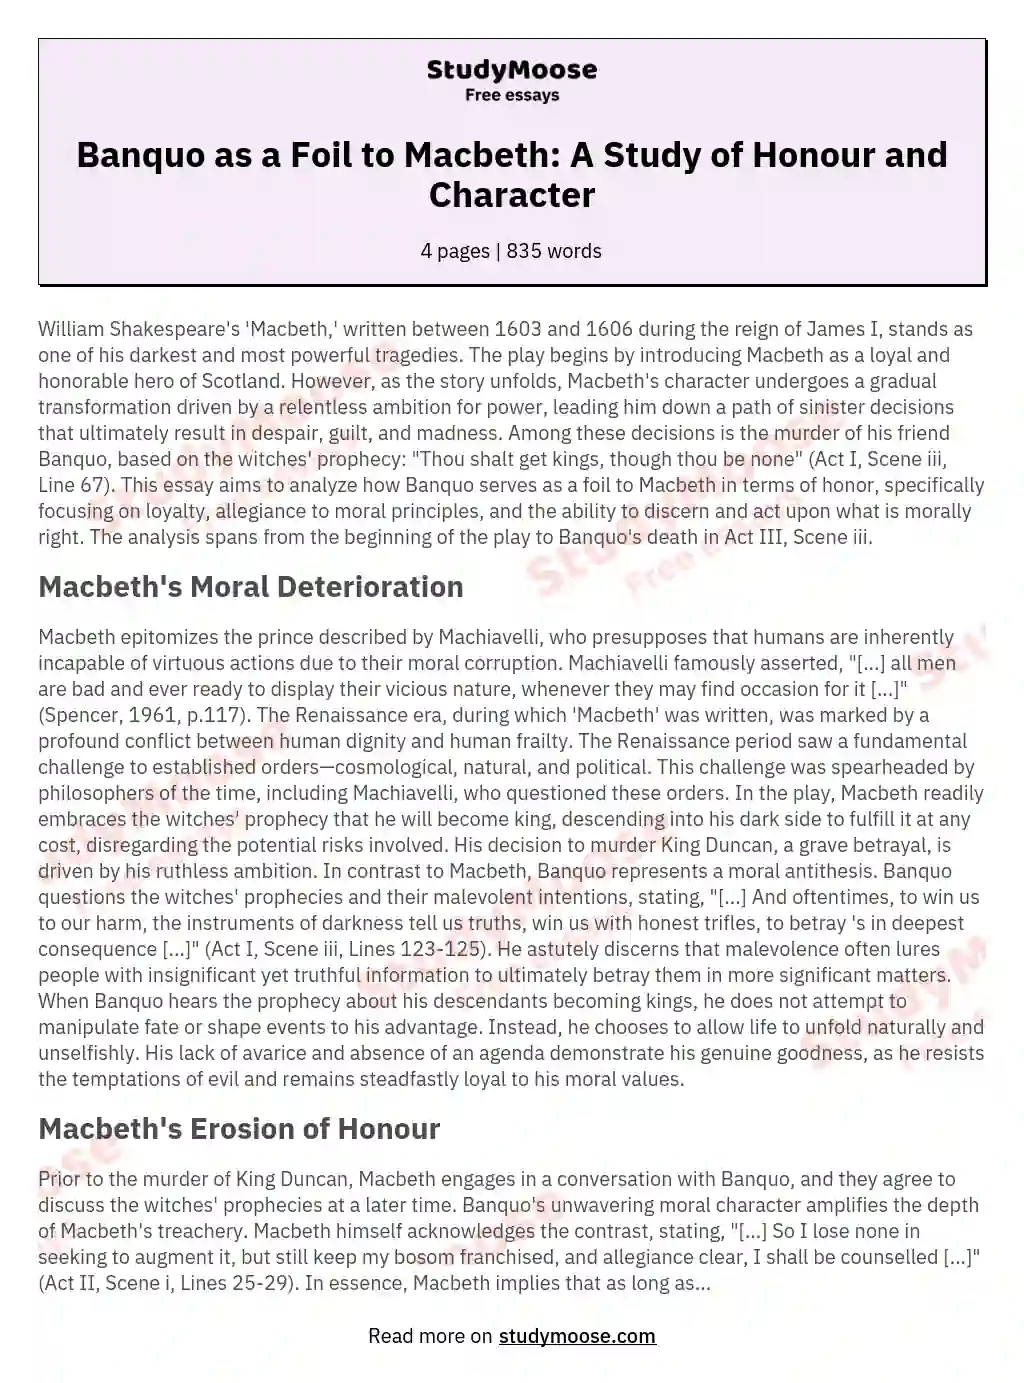 Banquo as a Foil to Macbeth: A Study of Honour and Character essay